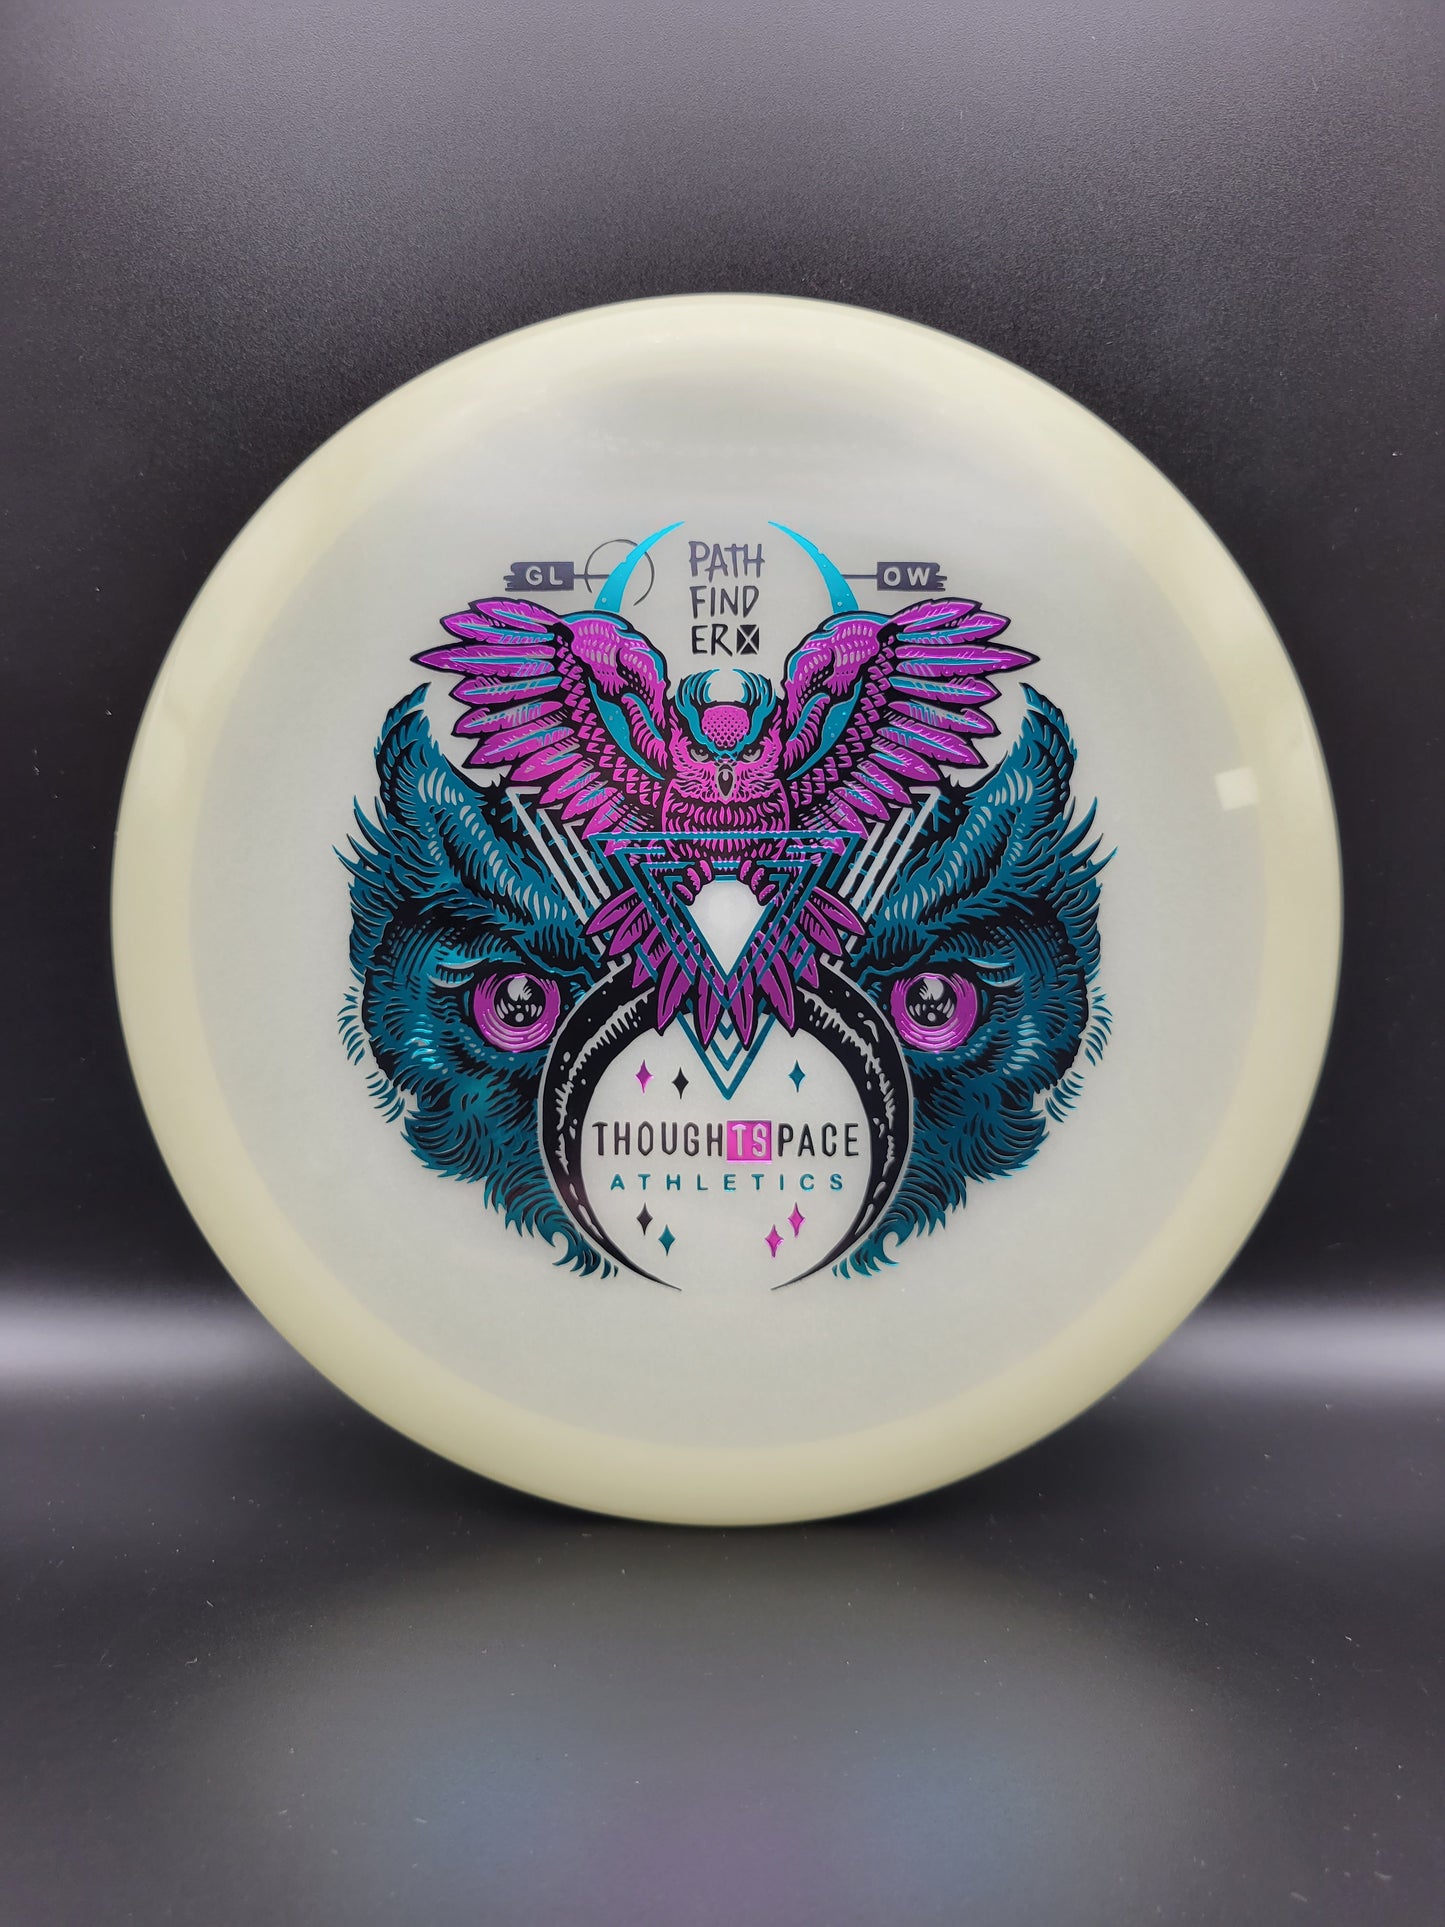 Thought Space Athletics Glow Pathfinder (Fly By Night Stamp)